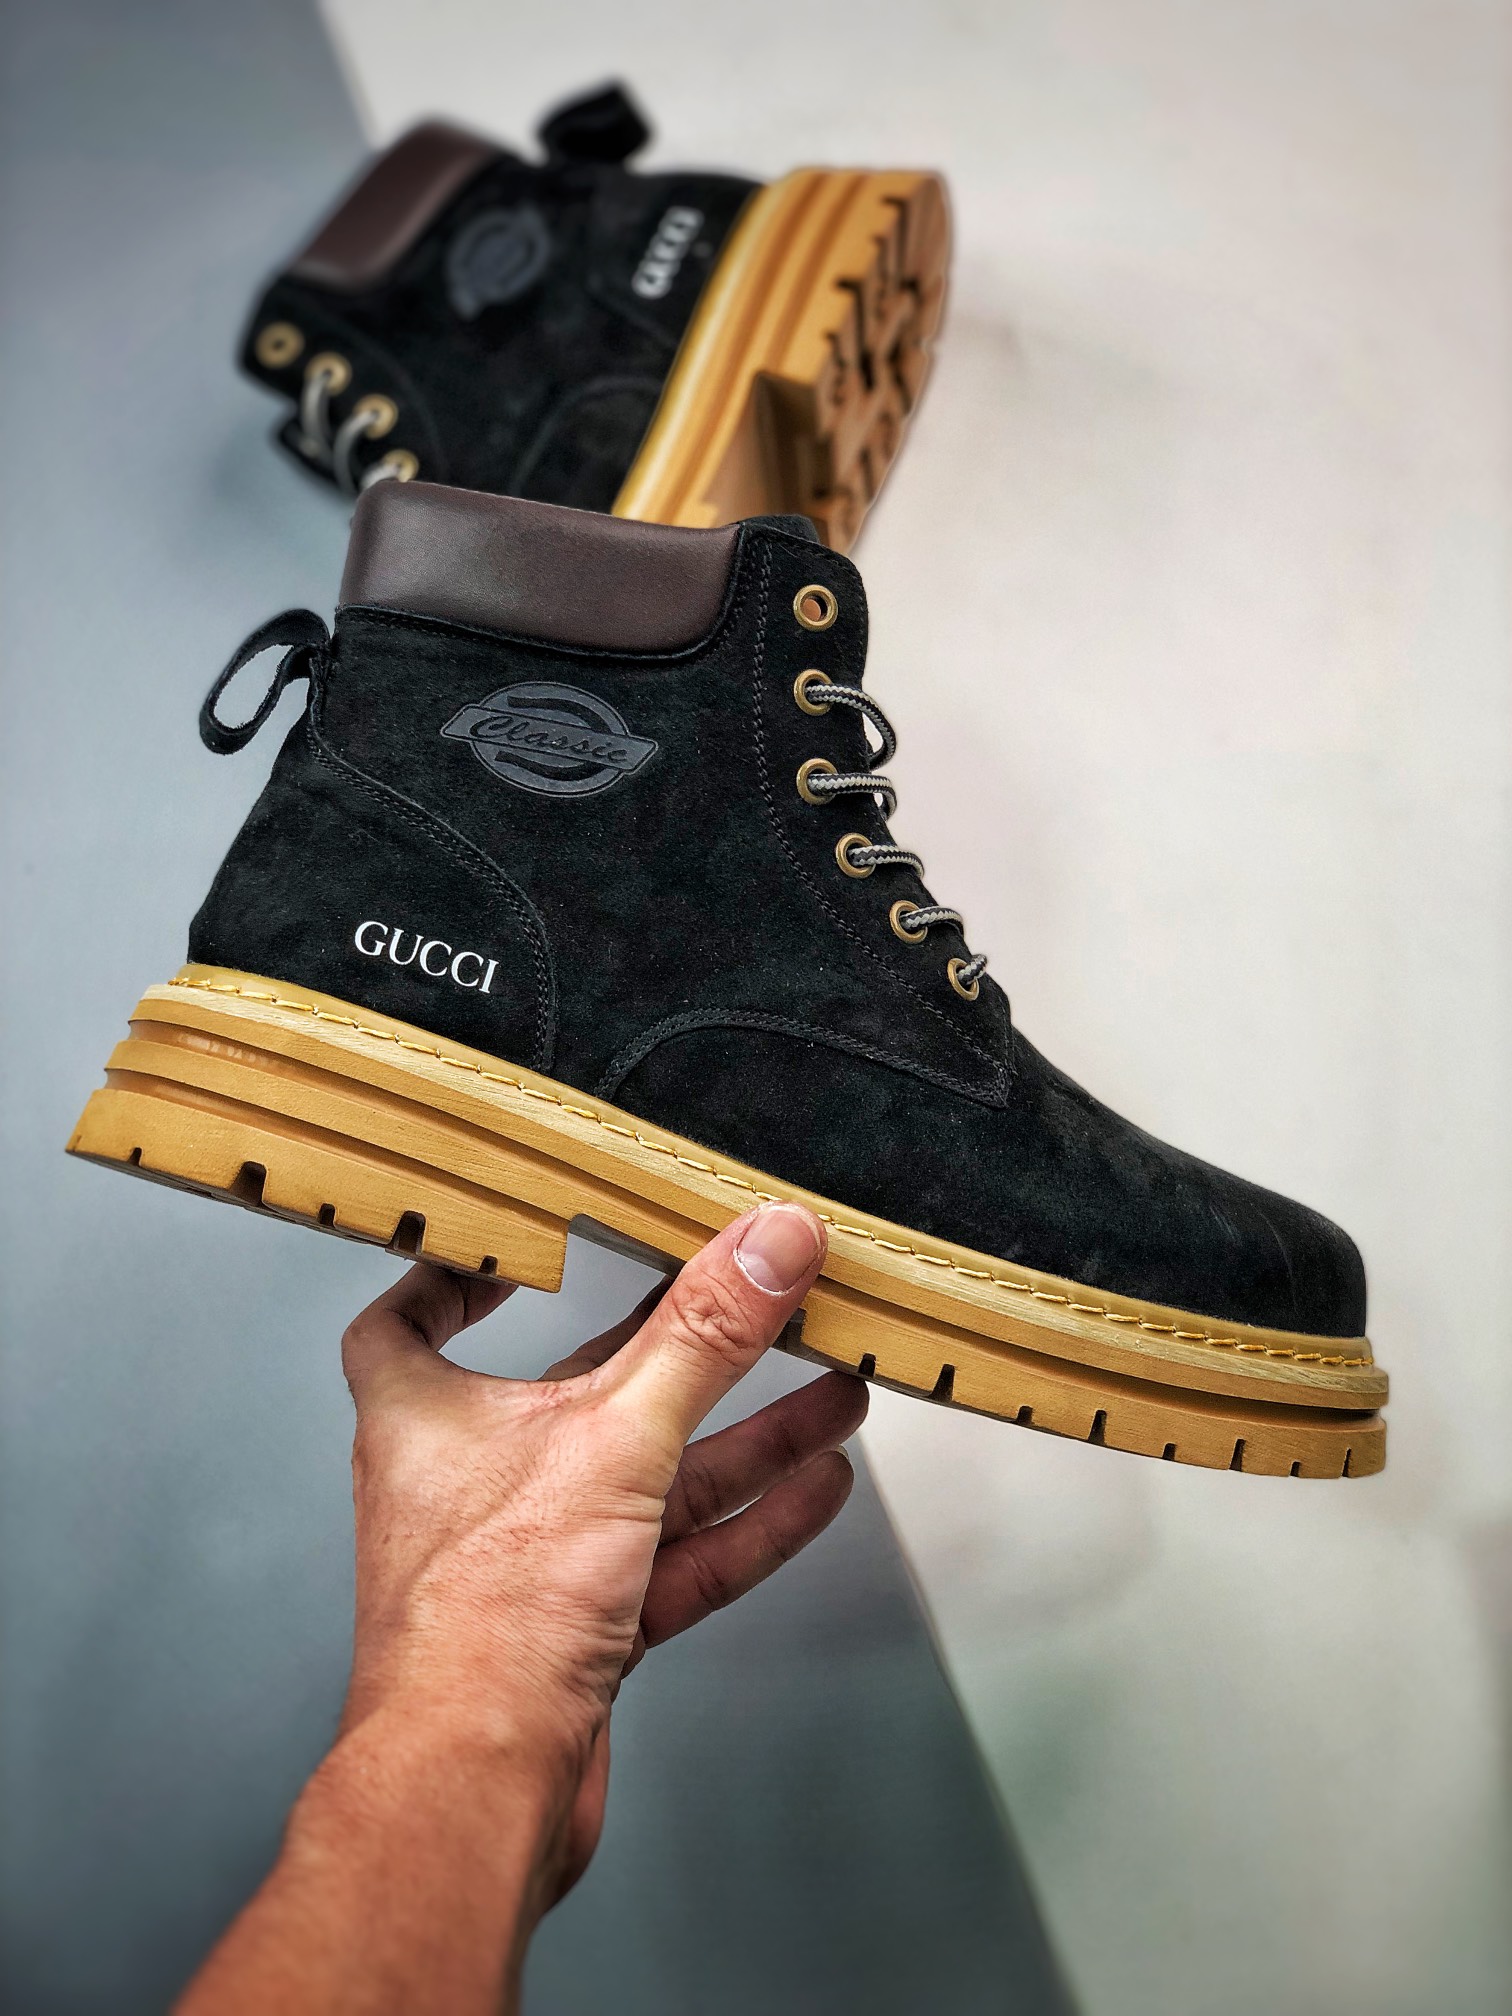 G's sports and leisure outdoor Martin boots series Overseas Amoy Mixed Selling Version Autumn and Winter New